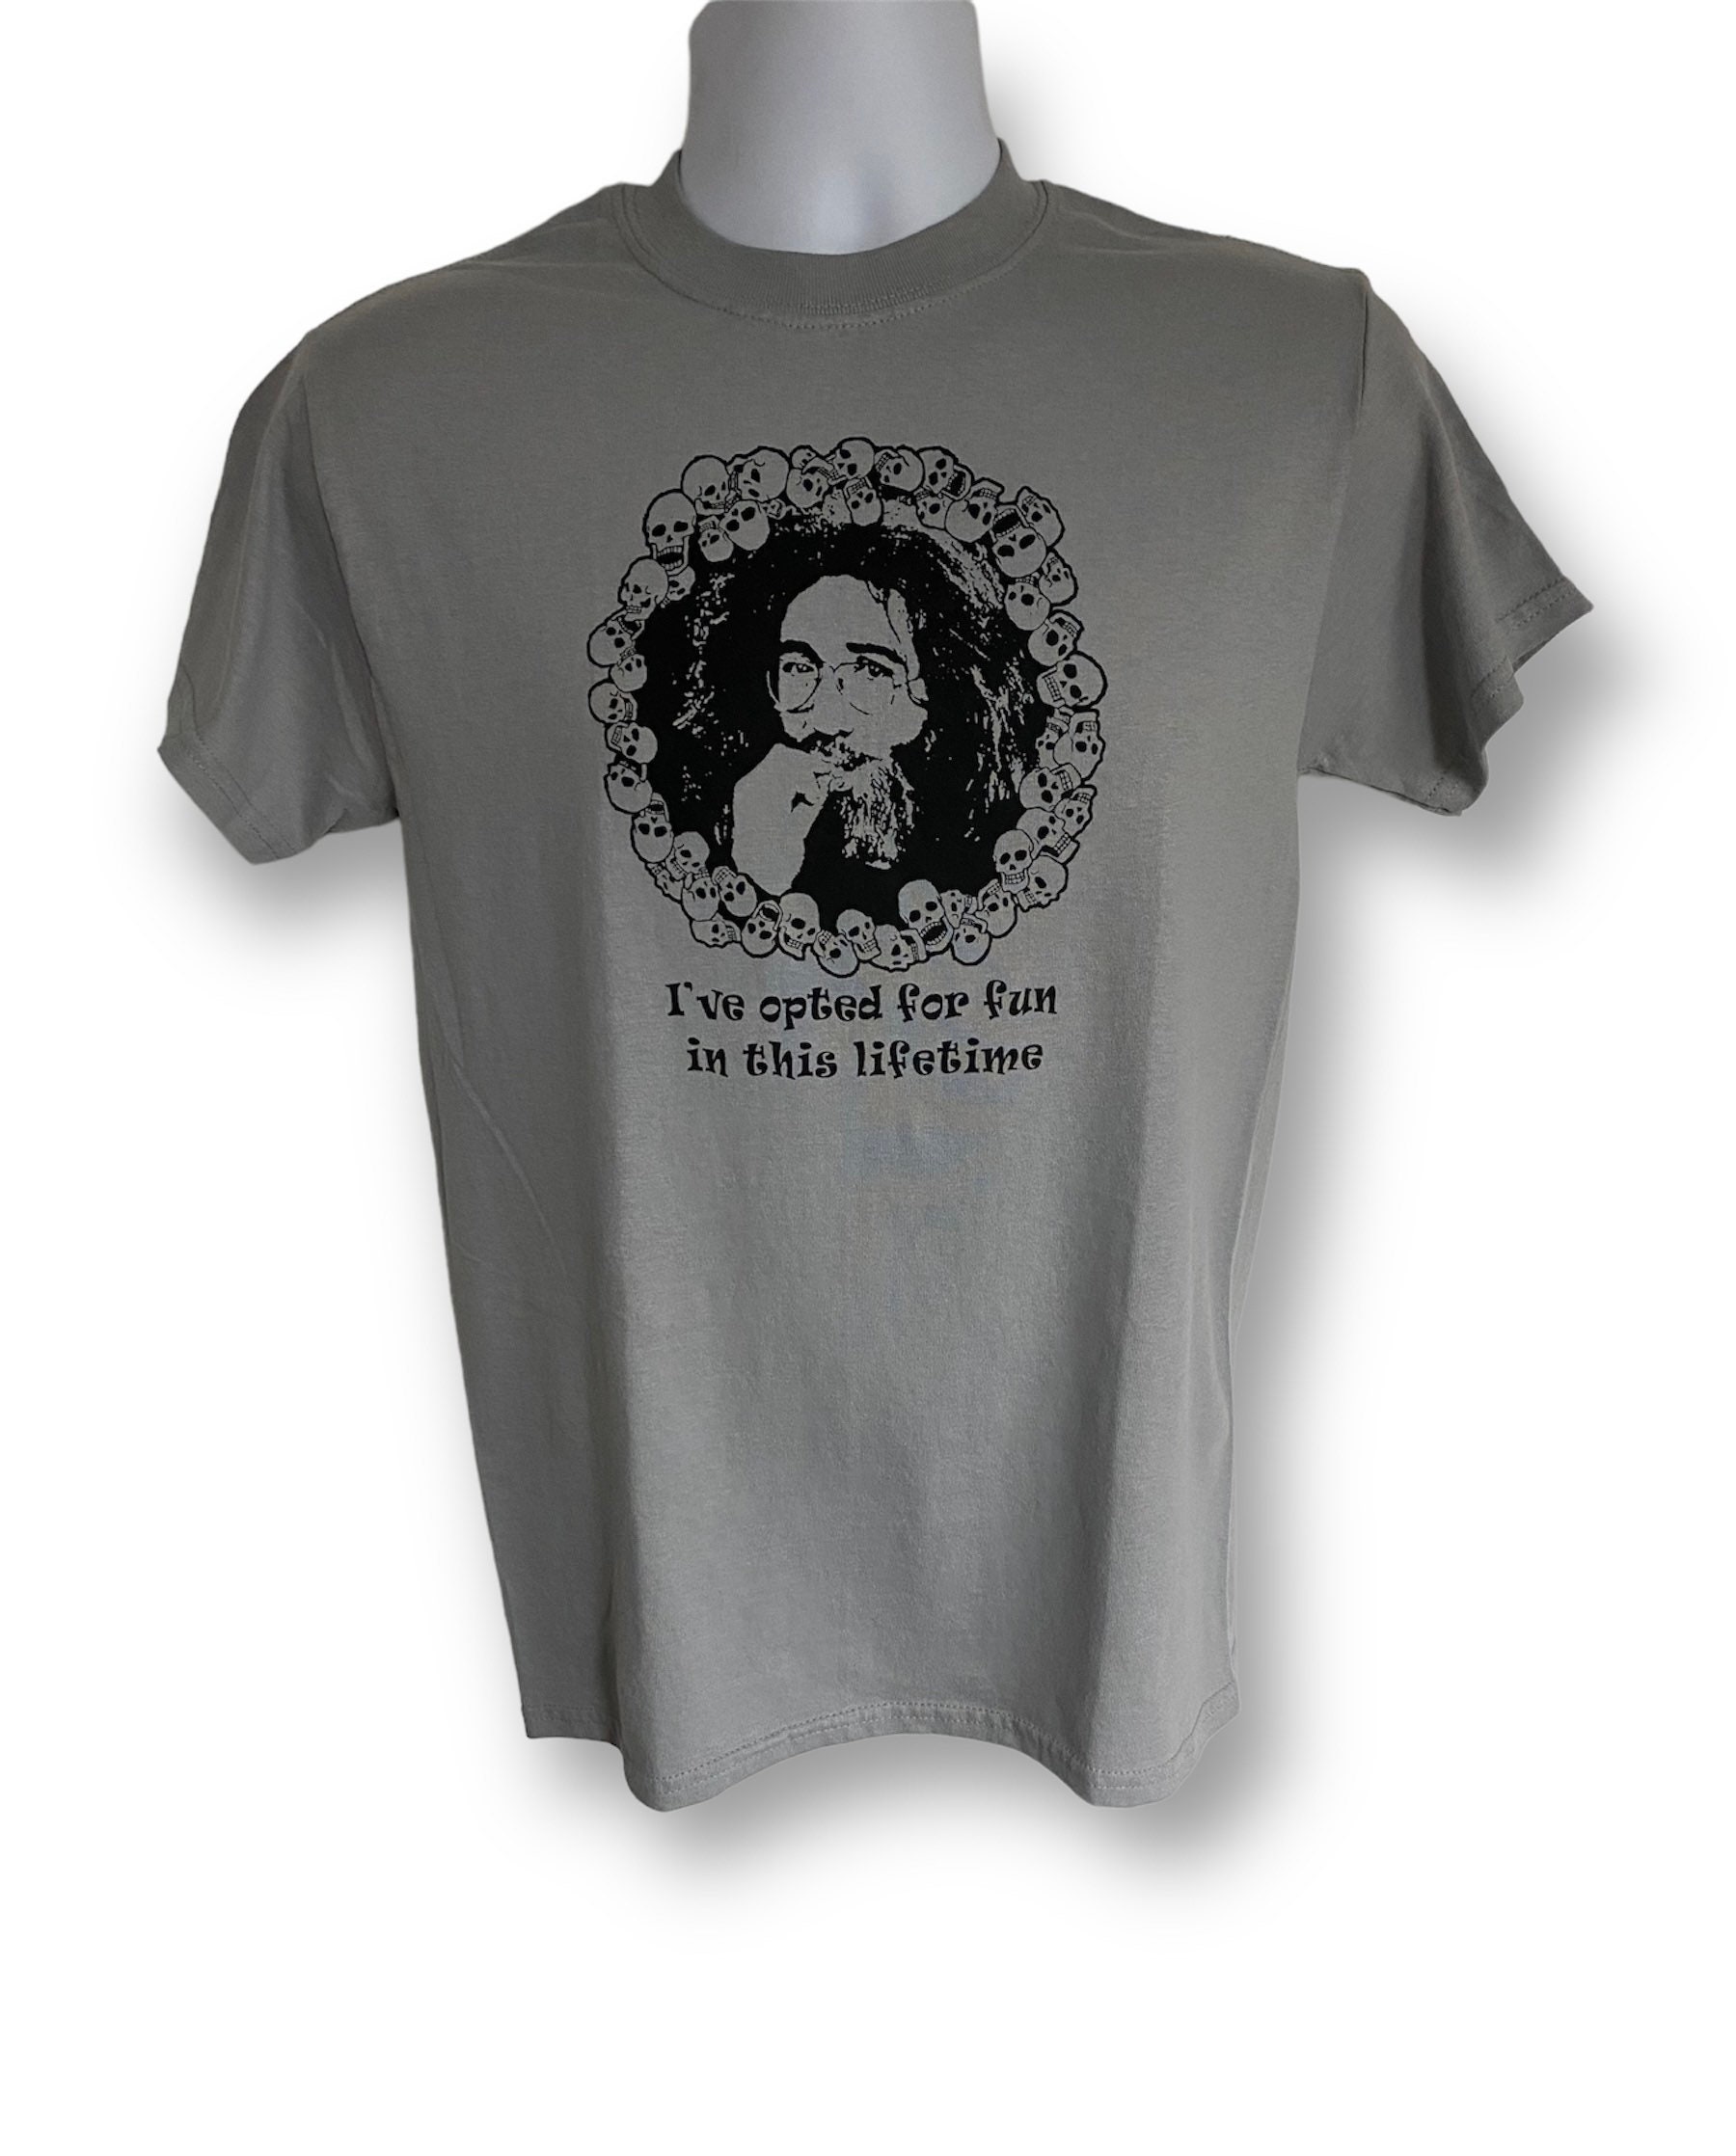 Israel for This Jerry Garcia T Opted Etsy Lifetime Shirt in - Fun ive